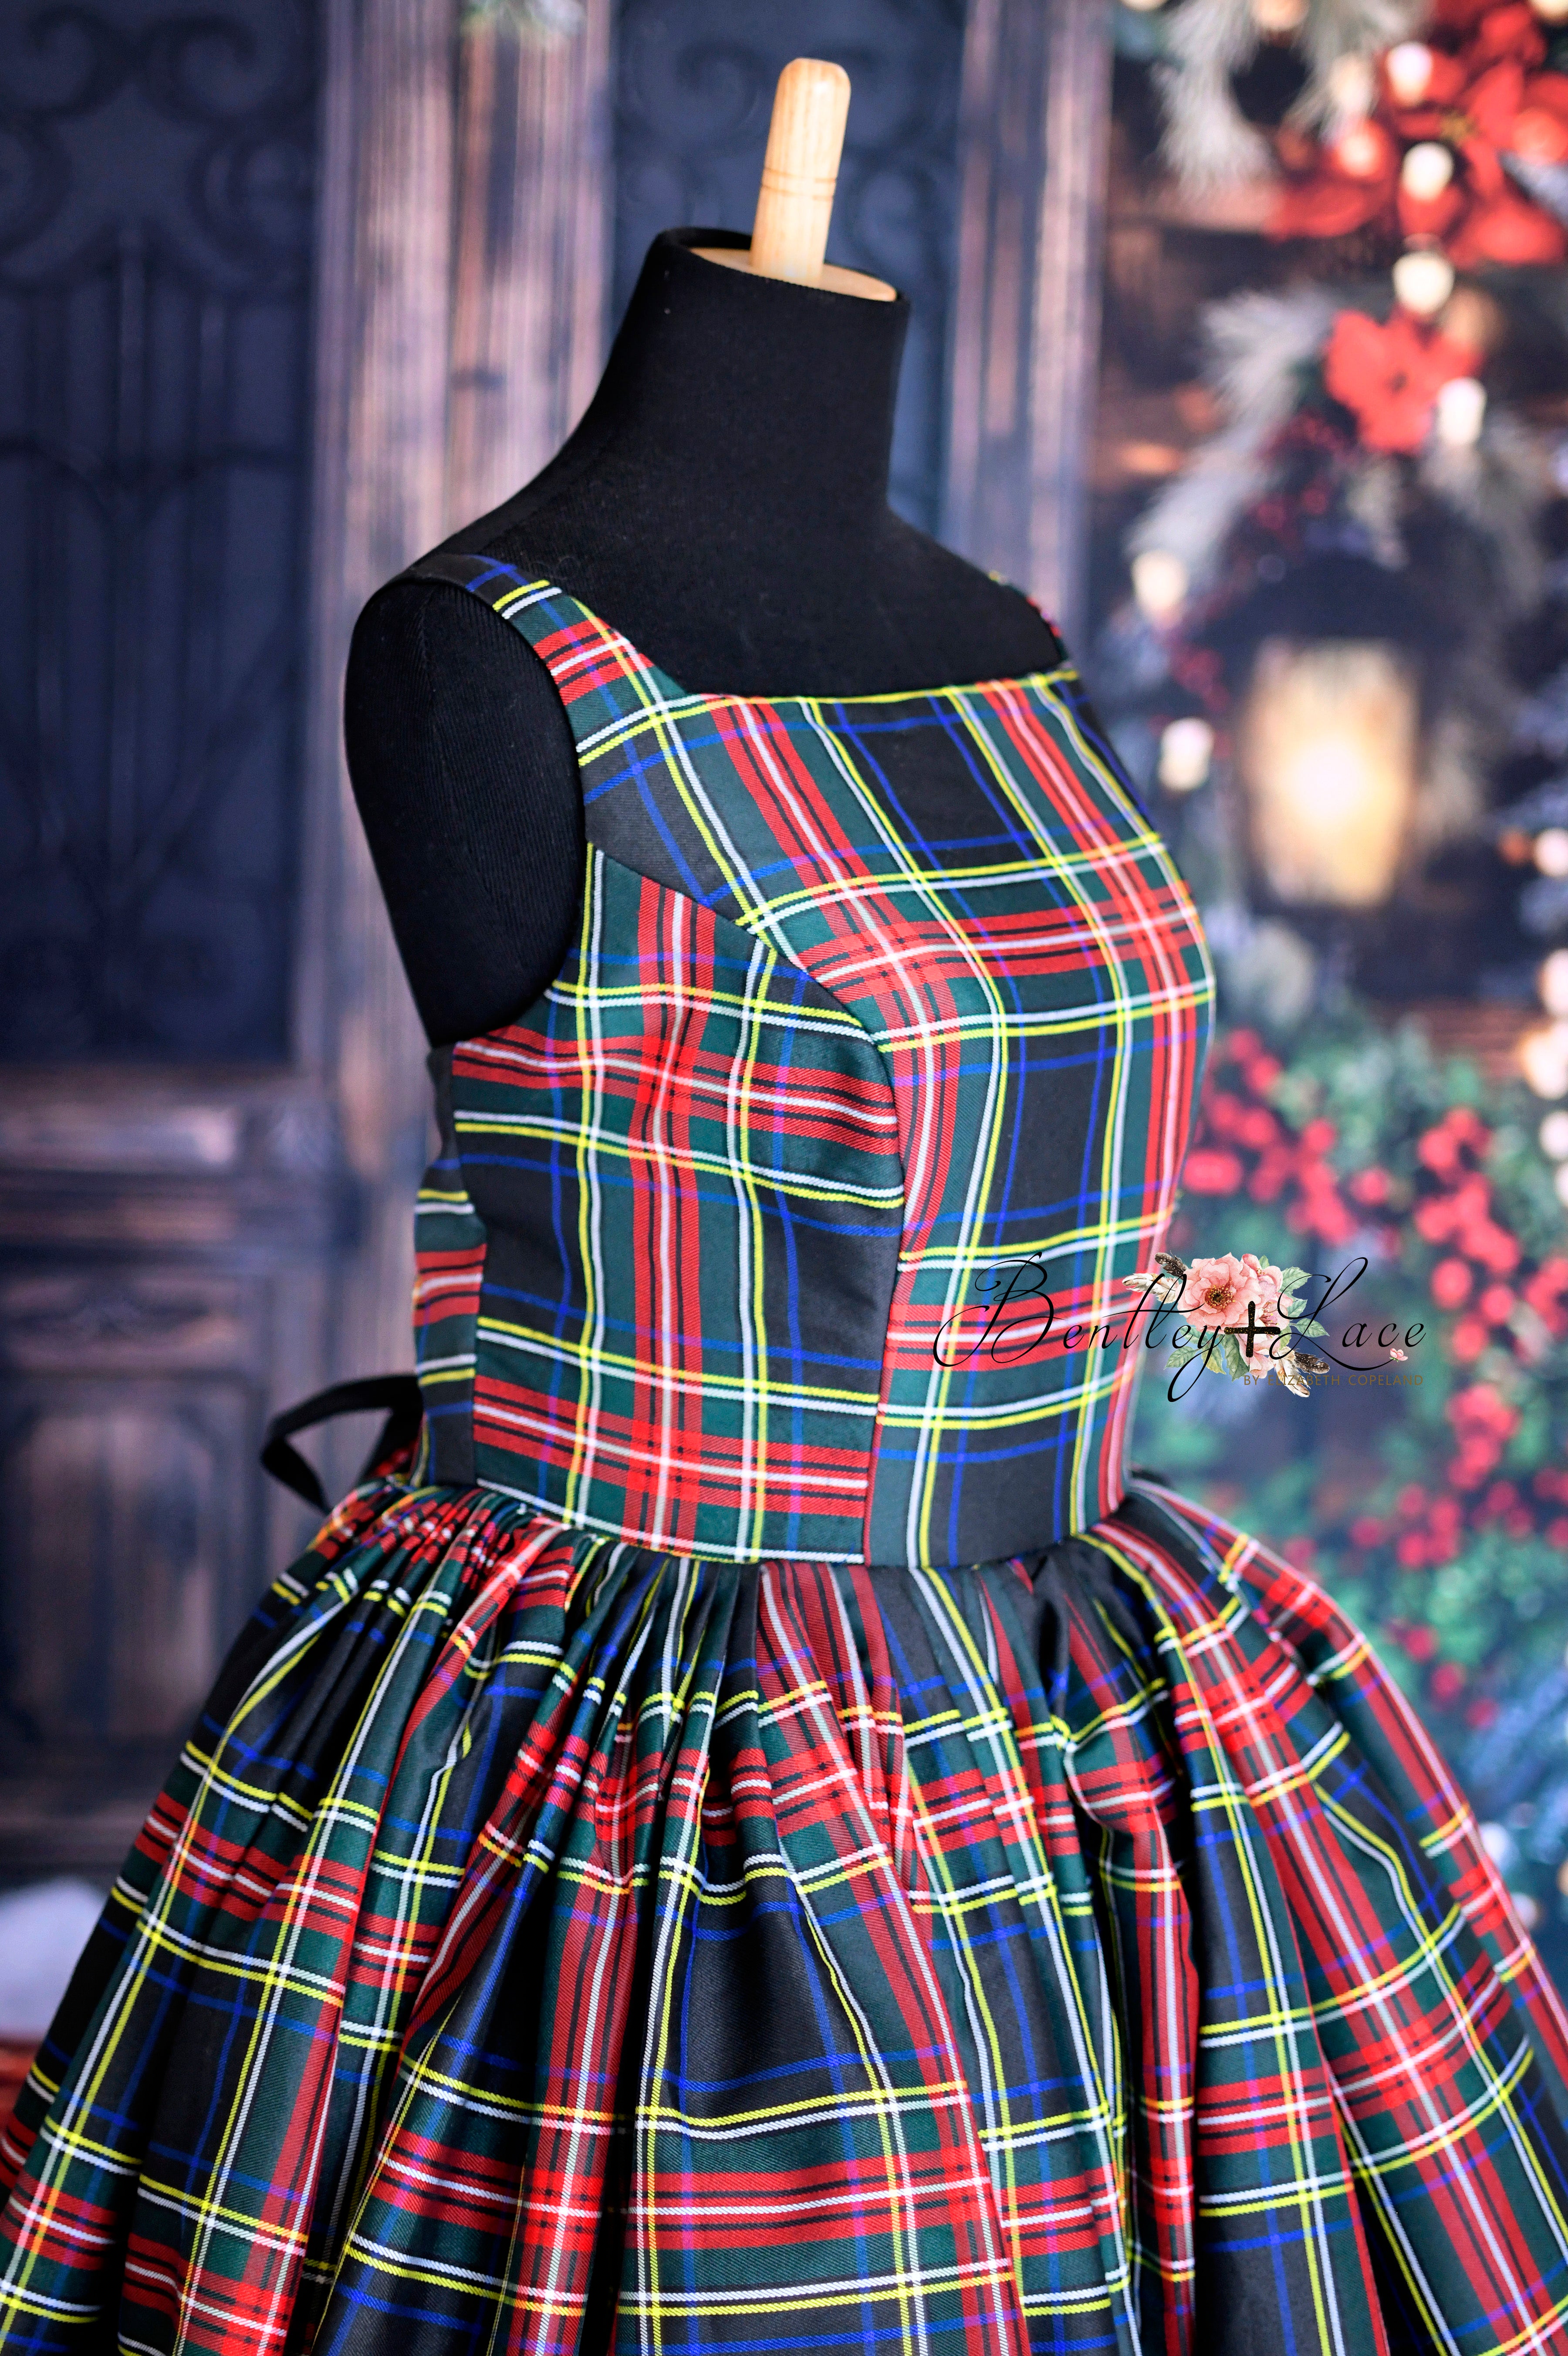 Couture gown rental: "Darling Plaid" Adult Short / Tea Length Dress ( Adult 8-12)